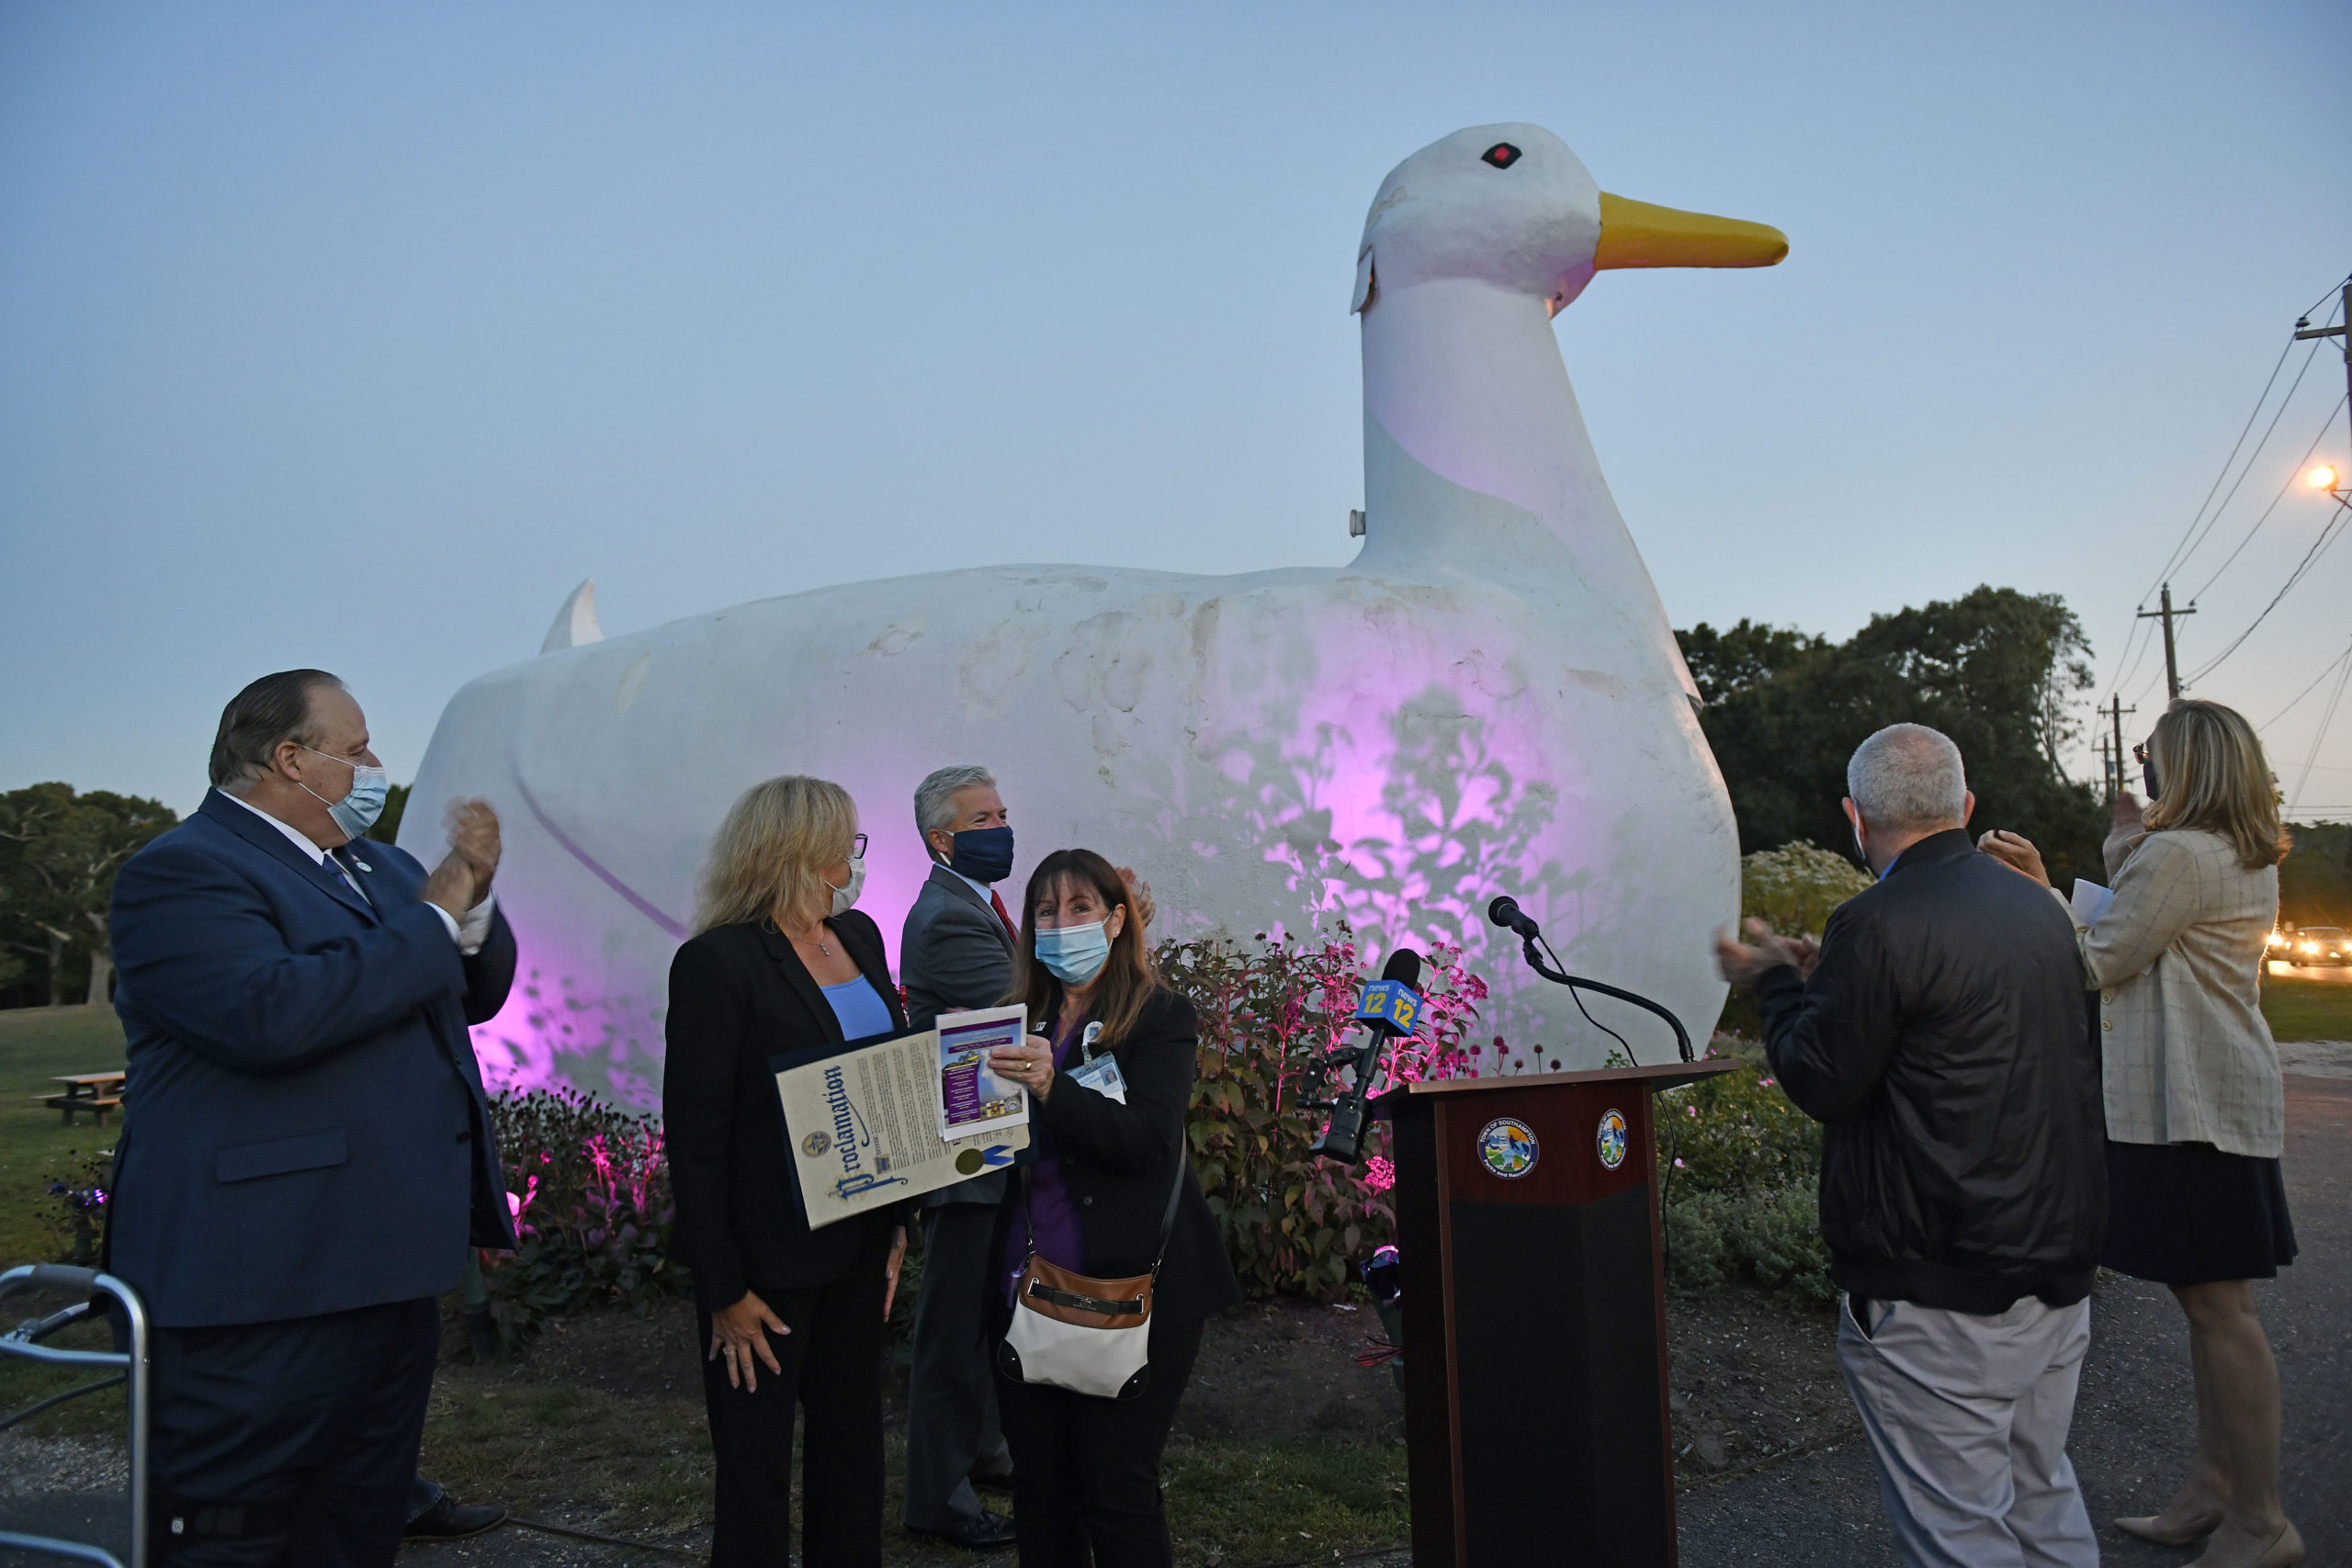 In honor of Emergency Nurses Week, The Town of Southampton lighted the Big Duck in Flanders purple on October 14. Southampton Town Supervisor Jay Schneiderman presented a proclamation and was joined by town board members, Couty Executive Steve Bellone, Assemblyman Fred W. Thiele Jr., and County Legislator Bridget Fleming.    DANA SHAW